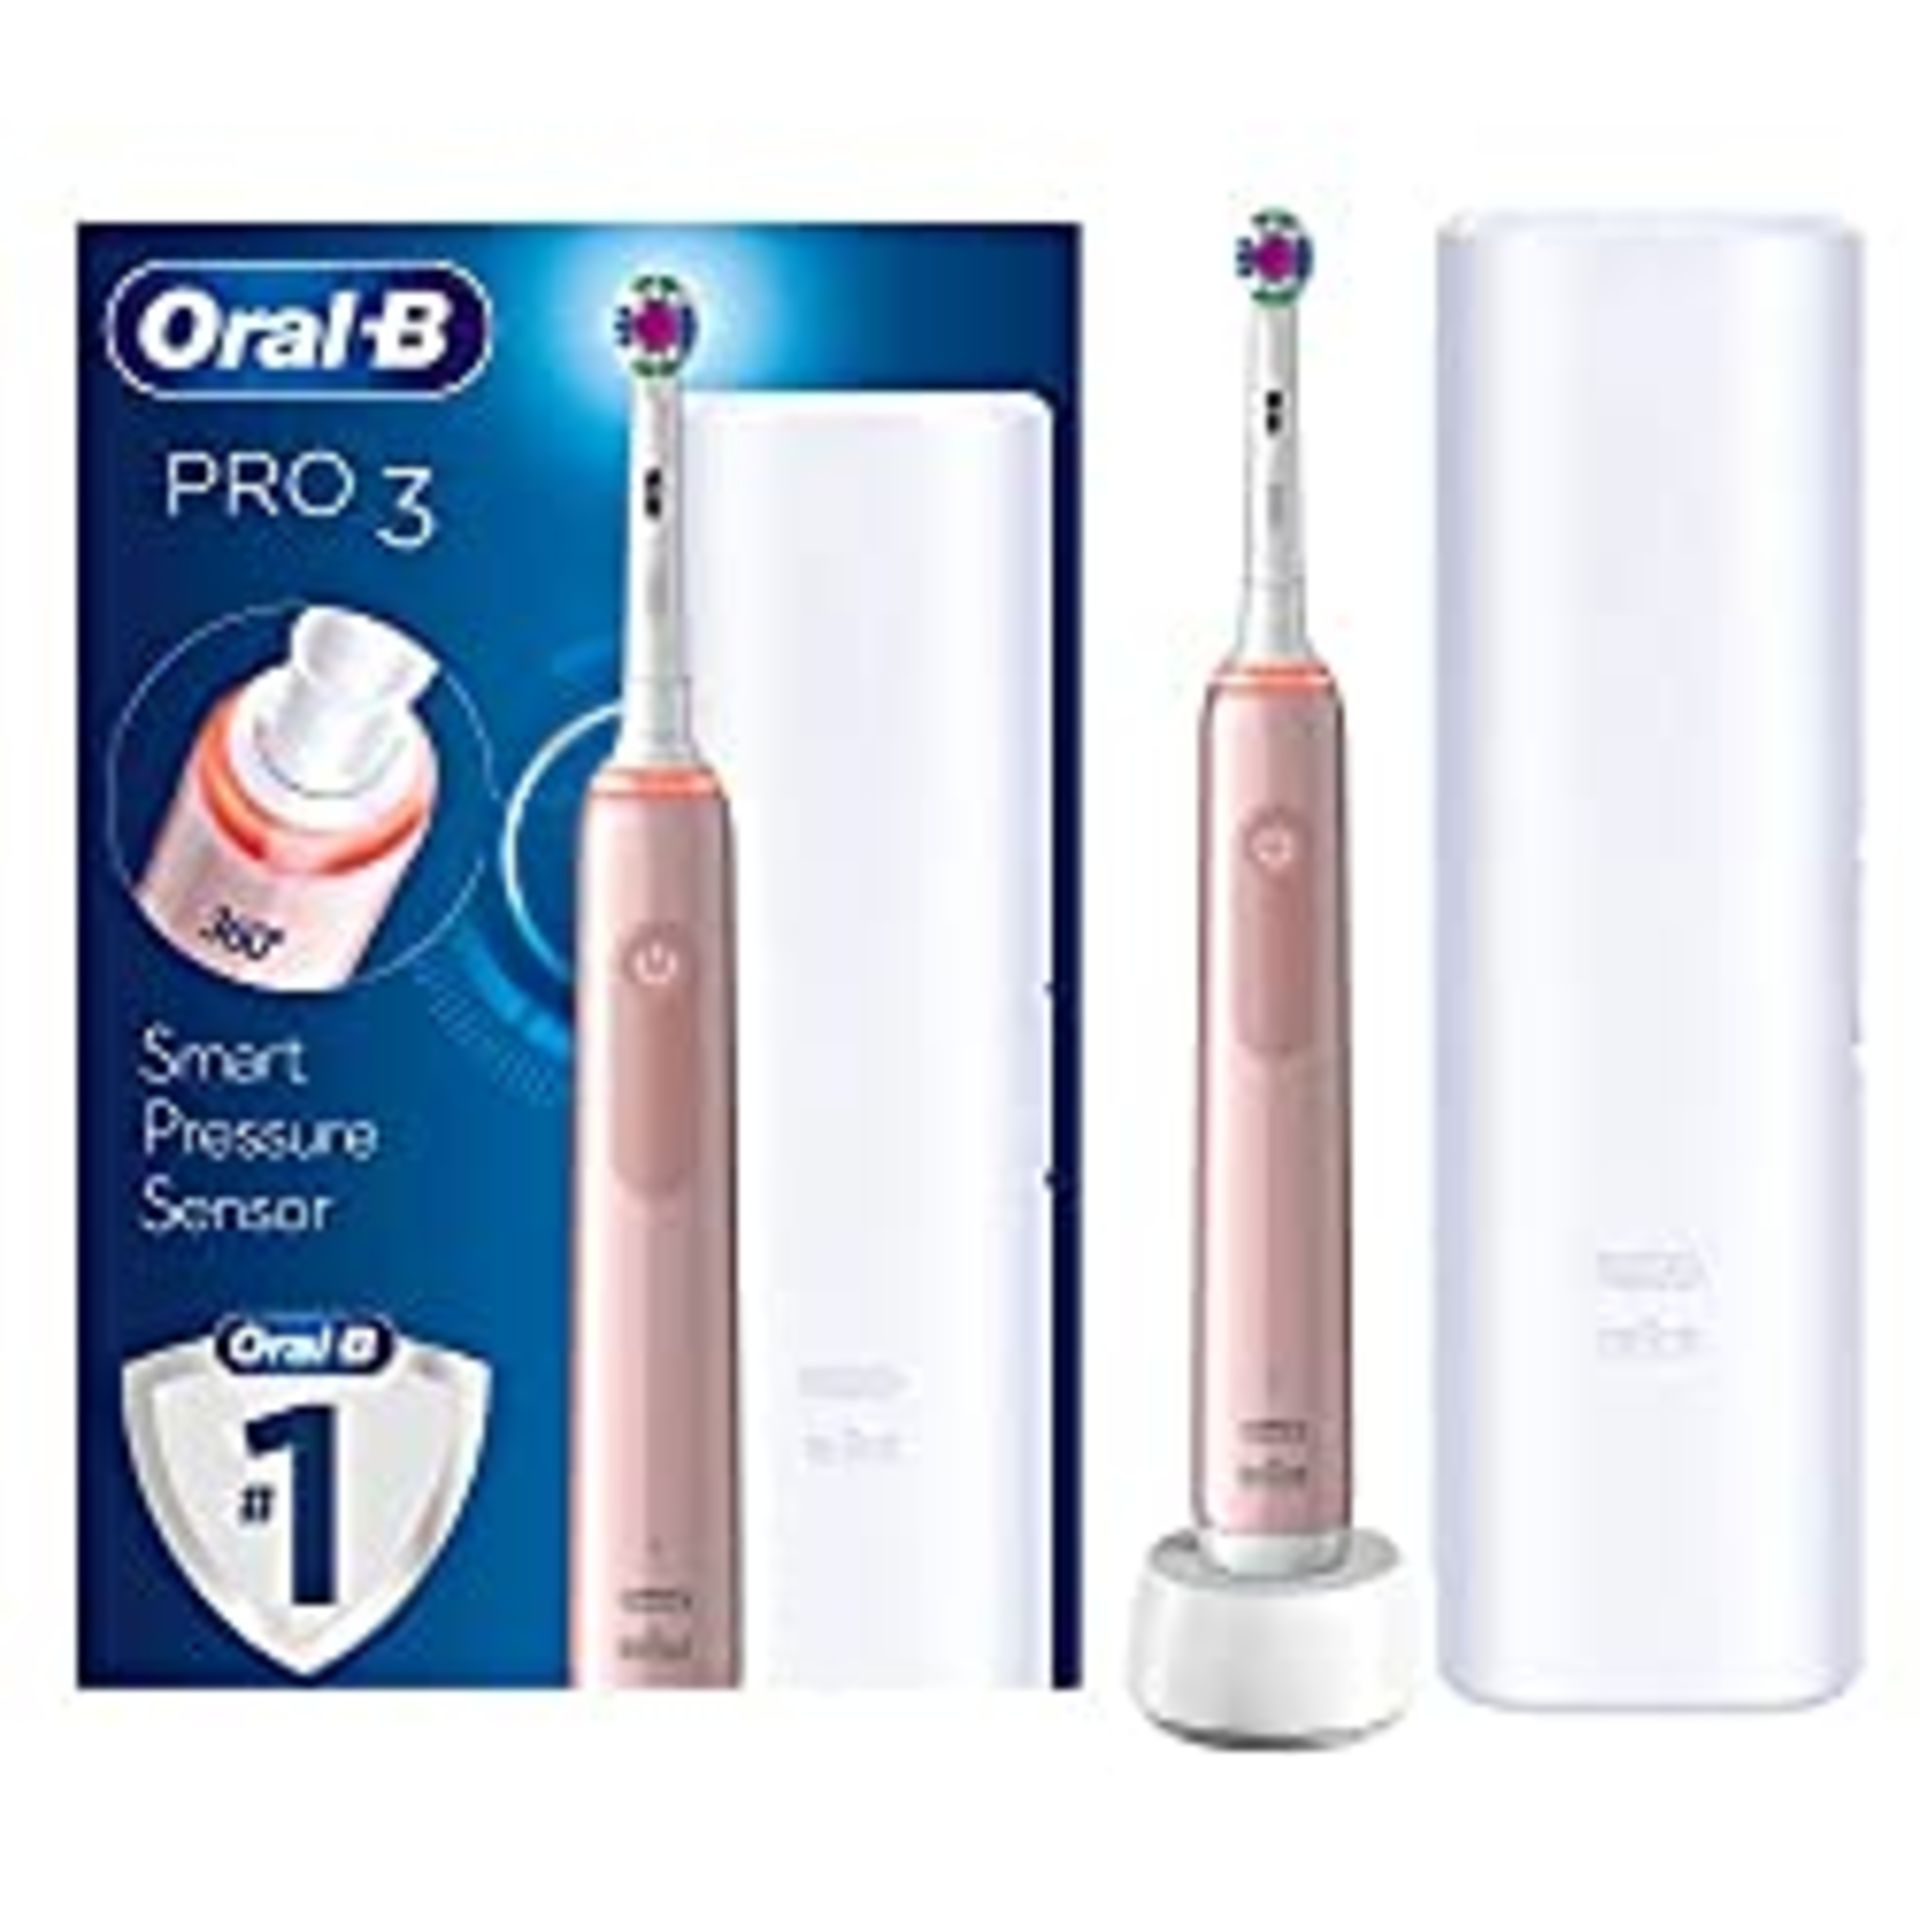 RRP £47.78 Oral-B Pro 3 Electric Toothbrush with Smart Pressure Sensor